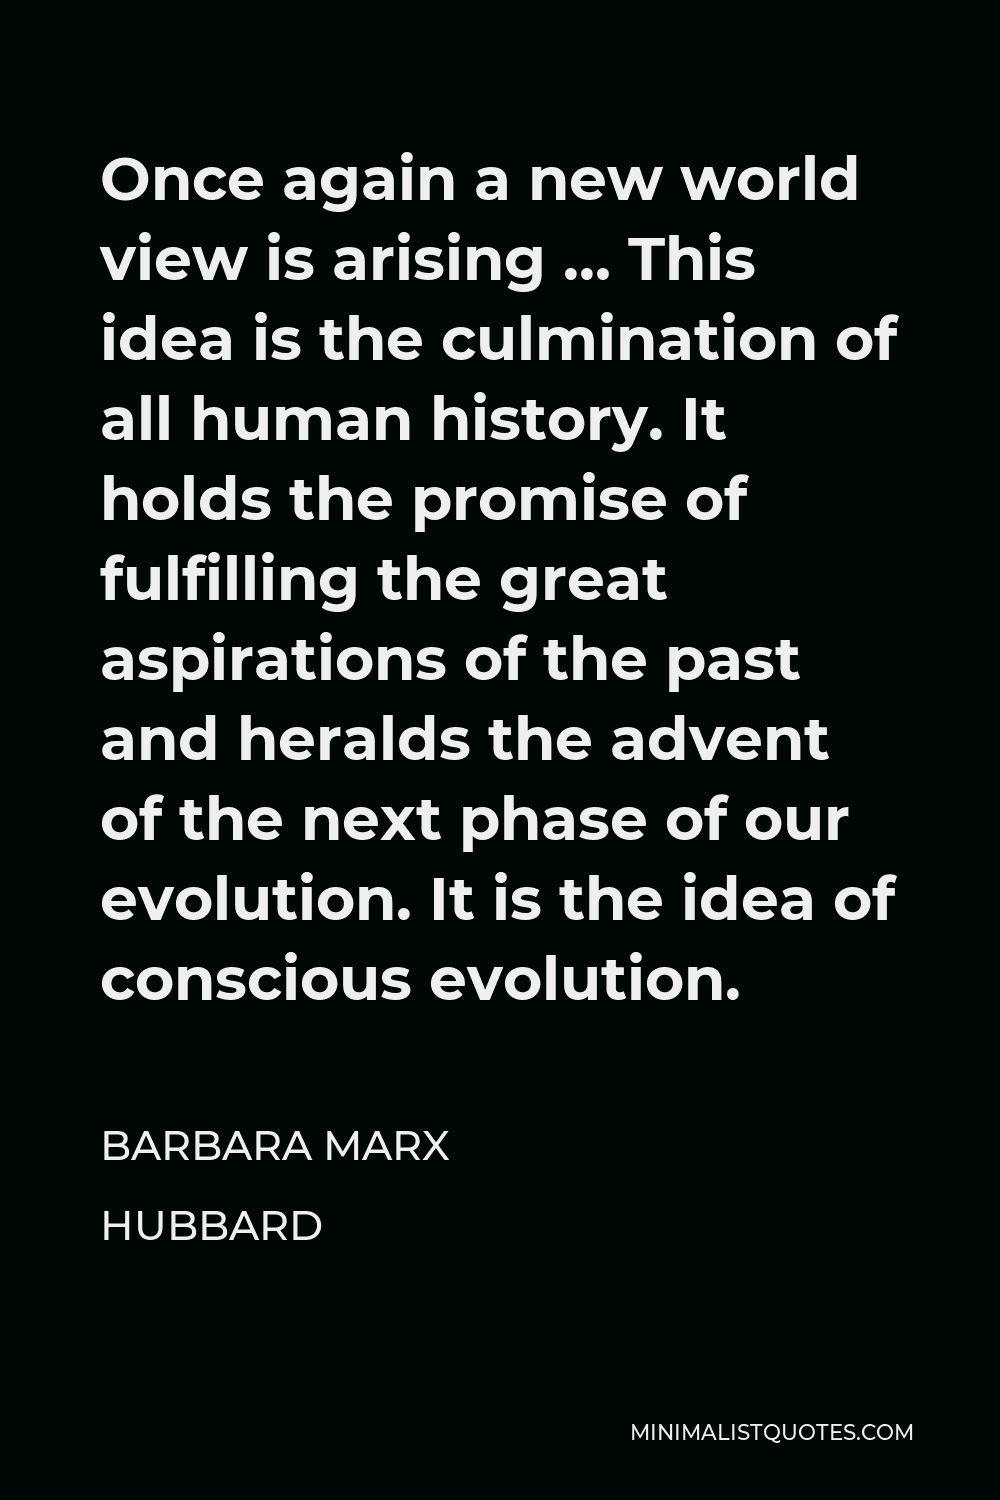 Barbara Marx Hubbard Quote - Once again a new world view is arising … This idea is the culmination of all human history. It holds the promise of fulfilling the great aspirations of the past and heralds the advent of the next phase of our evolution. It is the idea of conscious evolution.